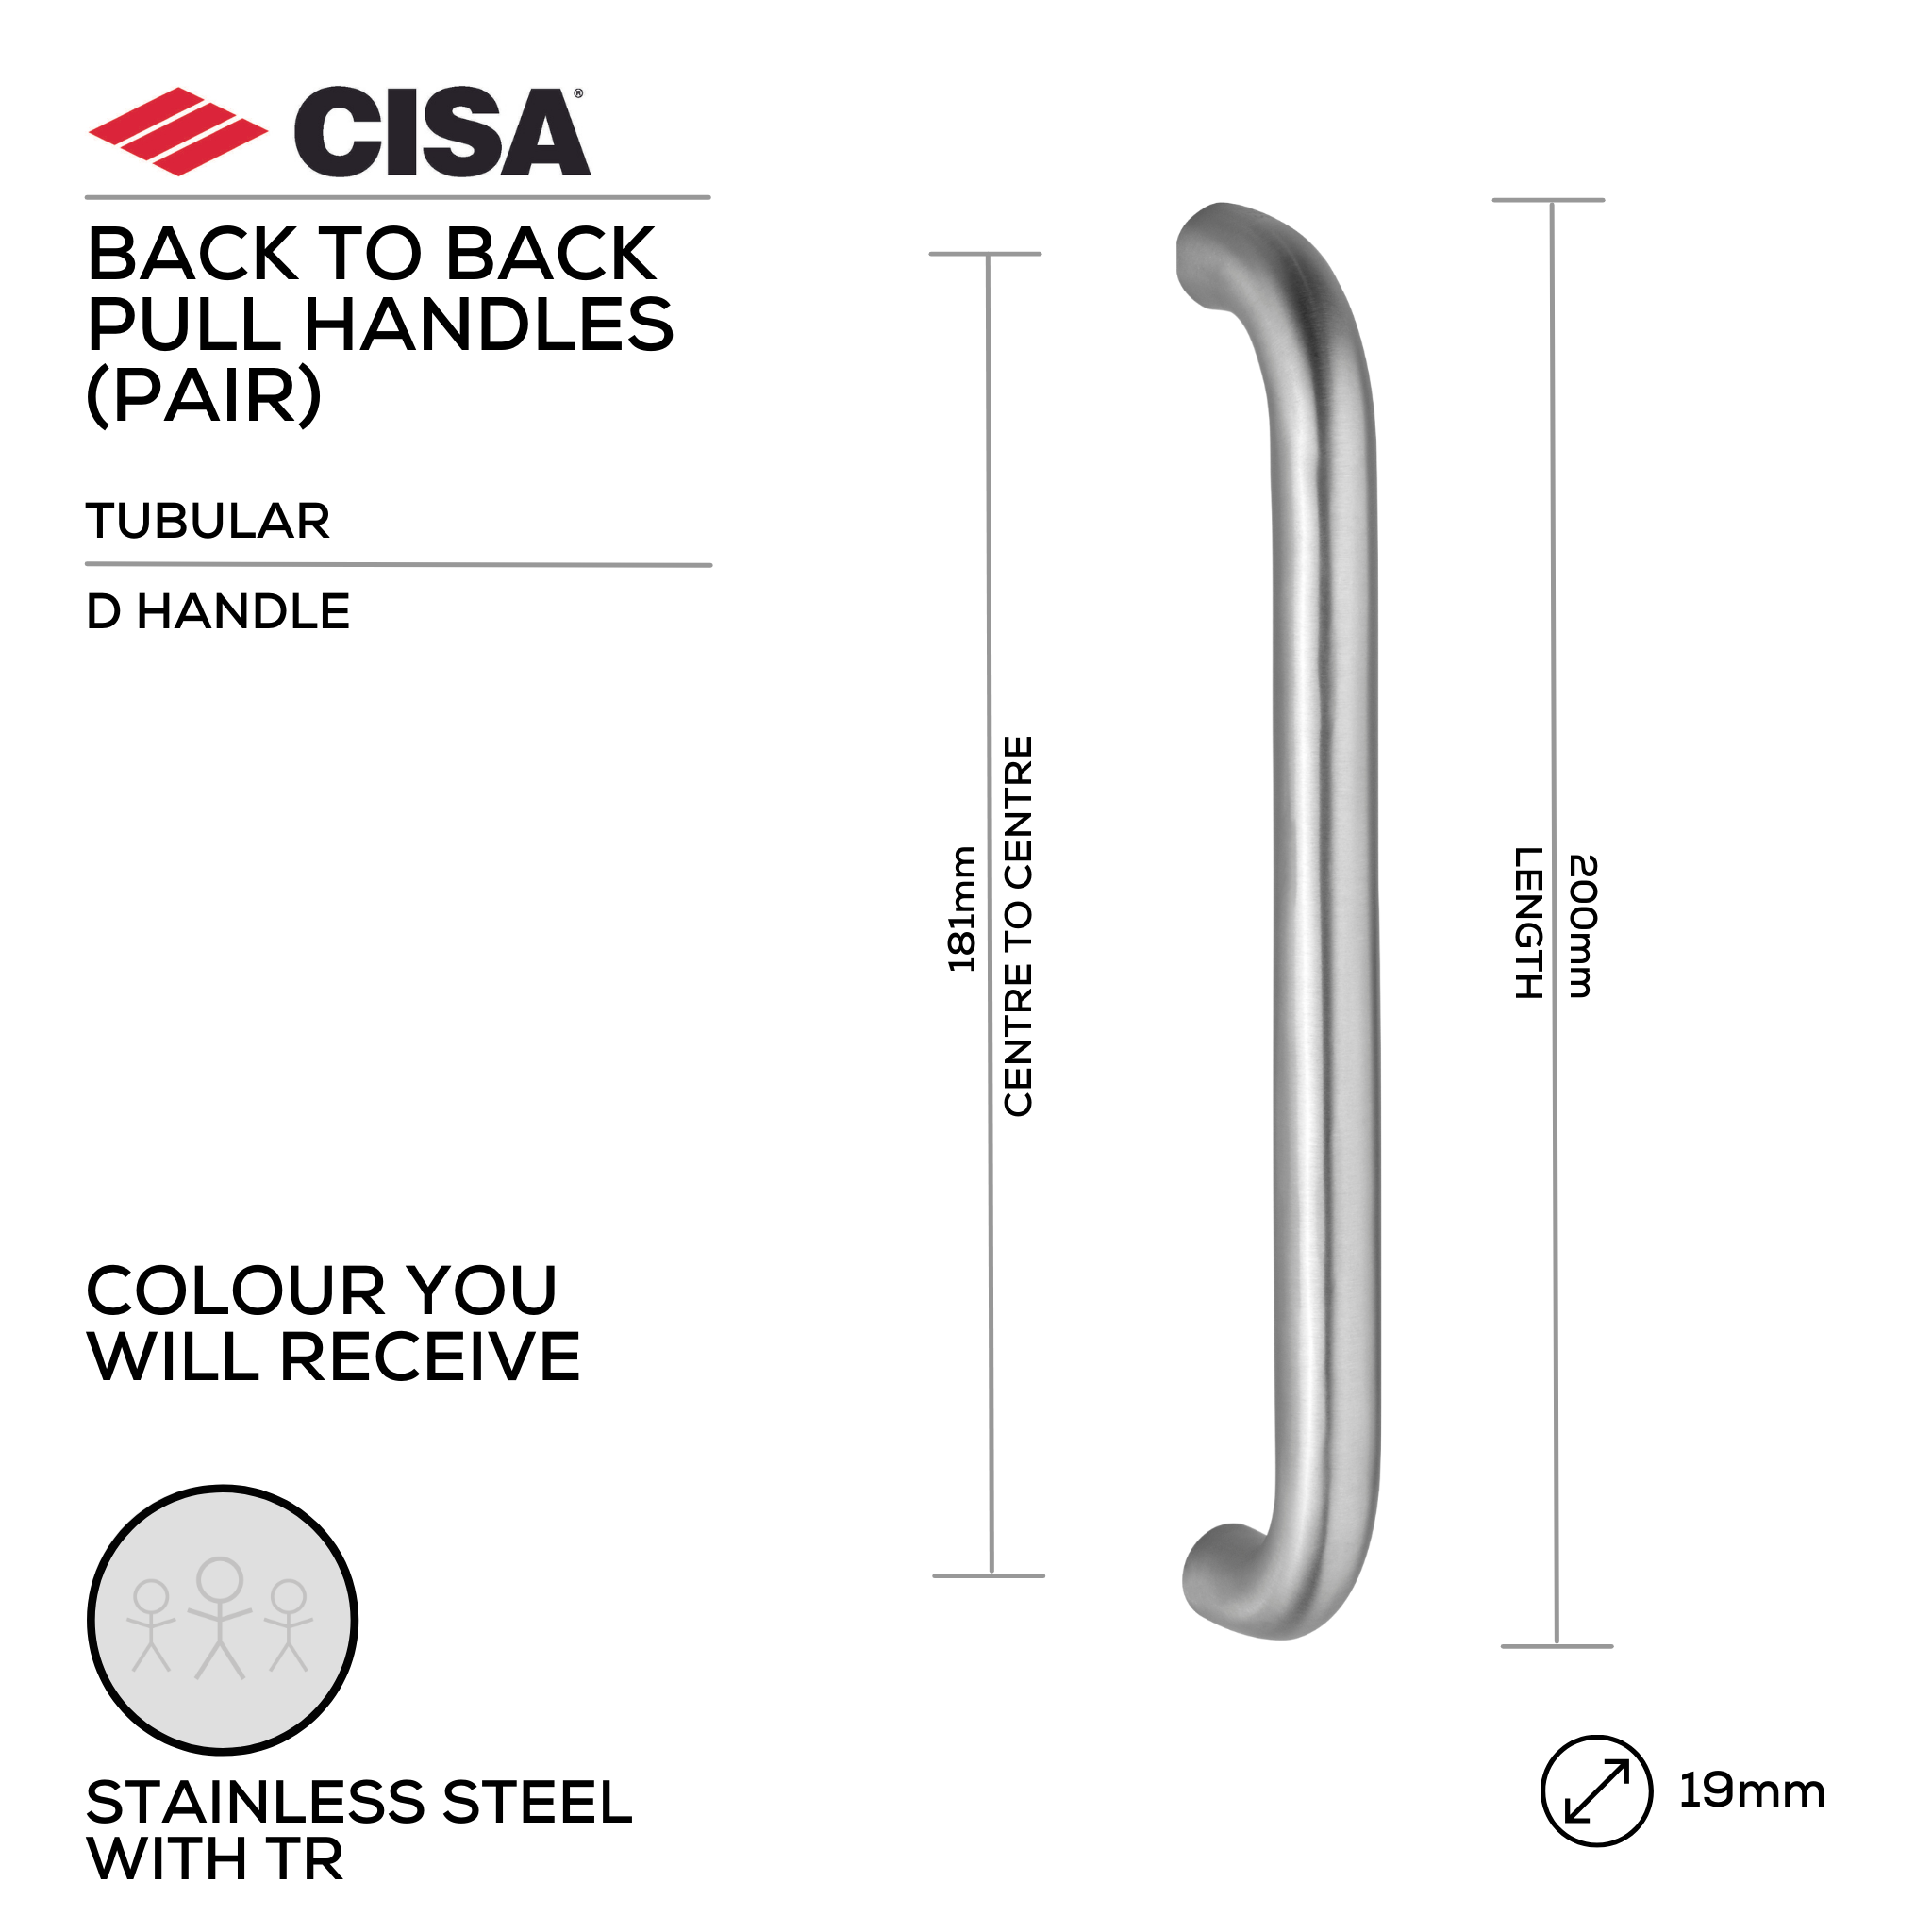 FP.D07.BB.TR, Pull Handle, Tubular, D Handle, BTB, 19mm (Ø) x 200mm (l) x 181mm (ctc), Stainless Steel with Tarnish Resistant, CISA